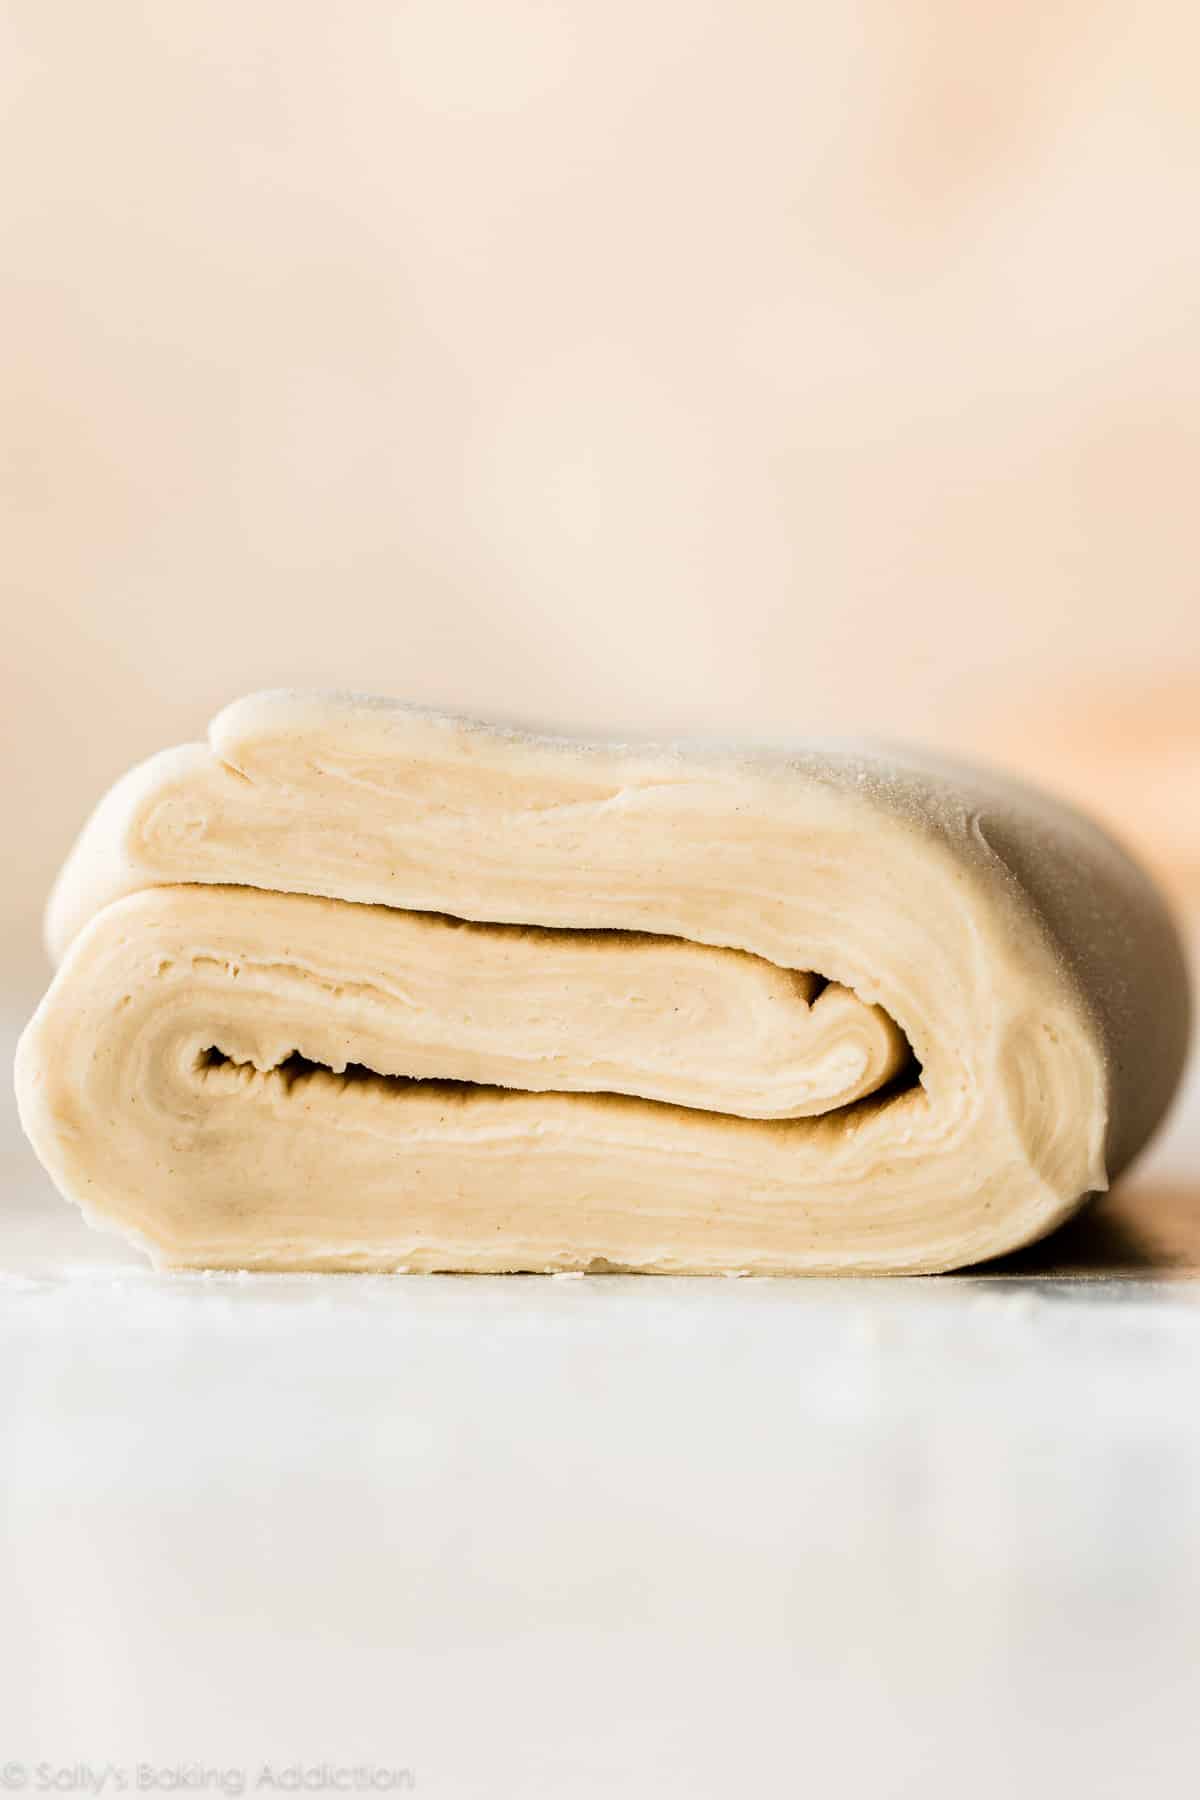 homemade puff pastry dough displaying all the layers of folded dough and butter inside